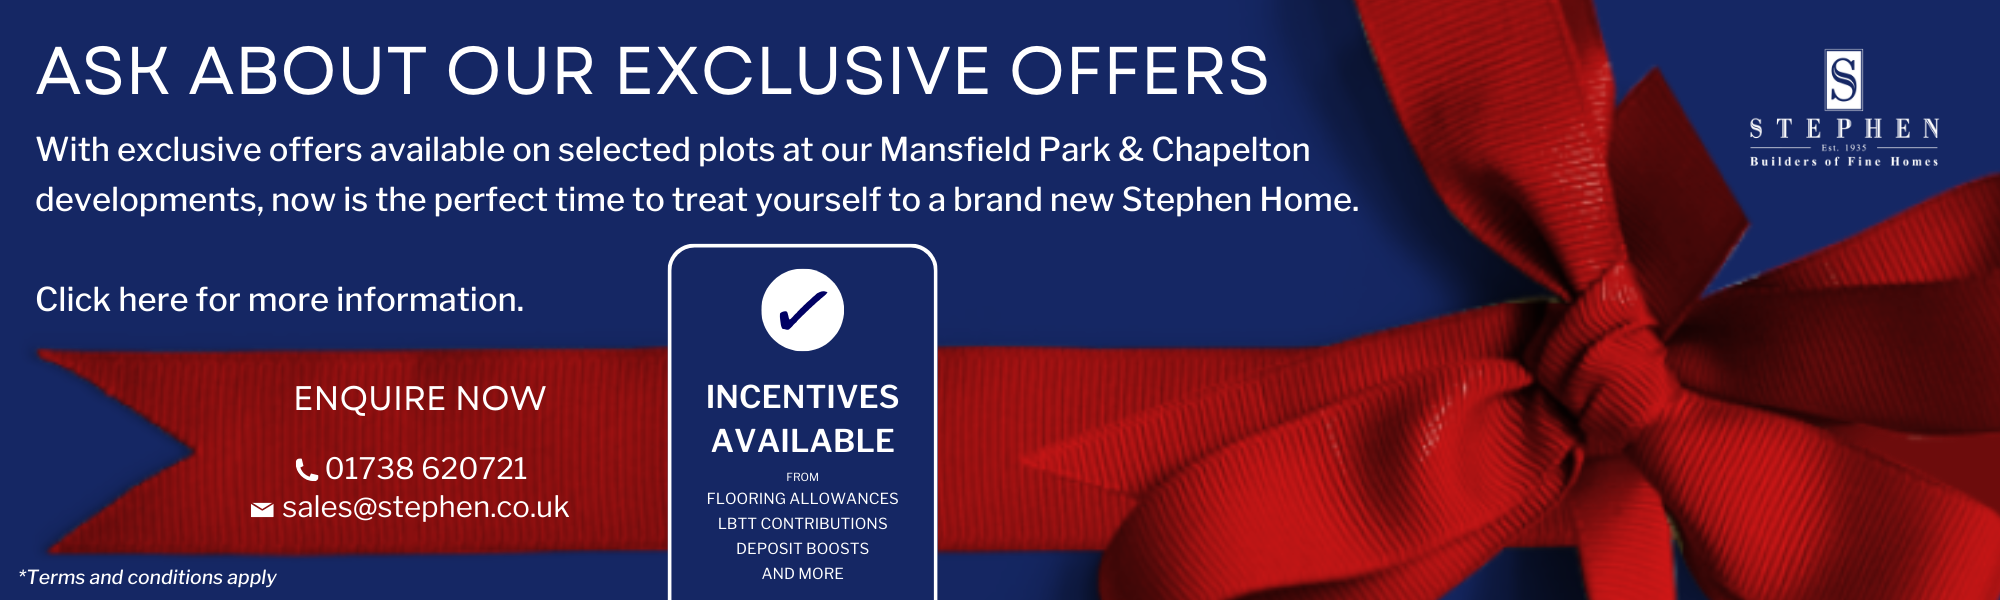 Mansfield Park Incentives